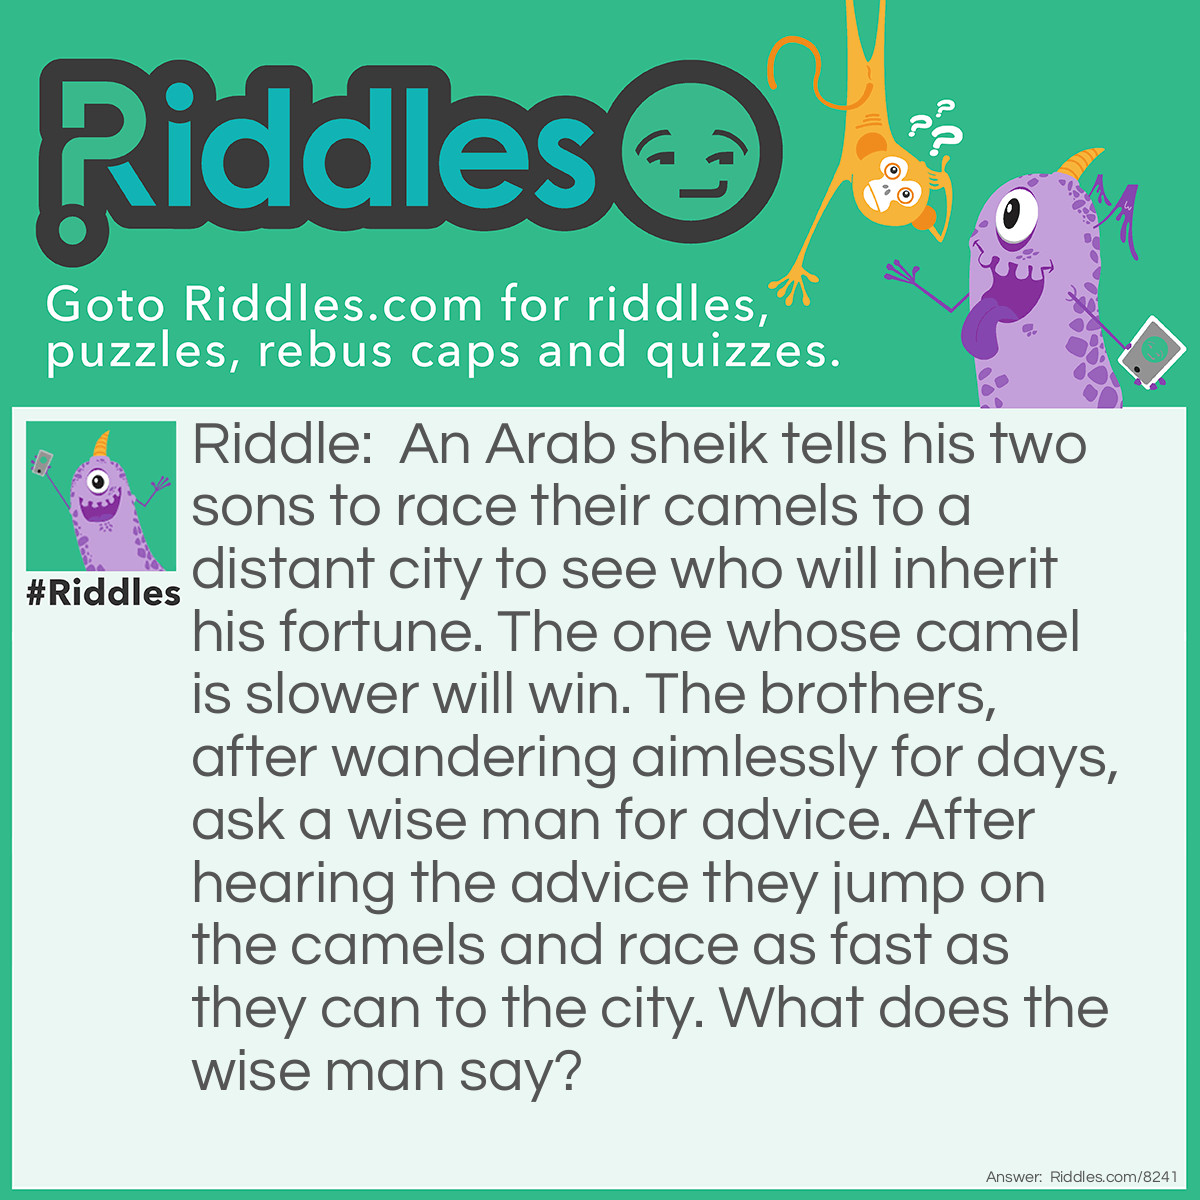 Riddle: An Arab sheik tells his two sons to race their camels to a distant city to see who will inherit his fortune. The one whose camel is slower will win. The brothers, after wandering aimlessly for days, ask a wise man for advice. After hearing the advice they jump on the camels and race as fast as they can to the city. What does the wise man say? Answer: The wise man tells them to switch camels. Each son owns a camel, let’s call them Camel A and Camel B. If Camel A is slower, son A gets the fortune. If Camel B is slower, son B gets the fortune. Neither of the sons wants to enter the city first because they won’t get the fortune. When they switch camels, son A is now riding his brother’s camel (camel B) and son B is riding his brother’s camel (camel A). Now, they each want the camel they’re riding to get to the city first. If son A wins the race on camel B, that means his camel, camel A, was slower and he wins the fortune. The same is true for the other way around if the second son wins the race on camel A.